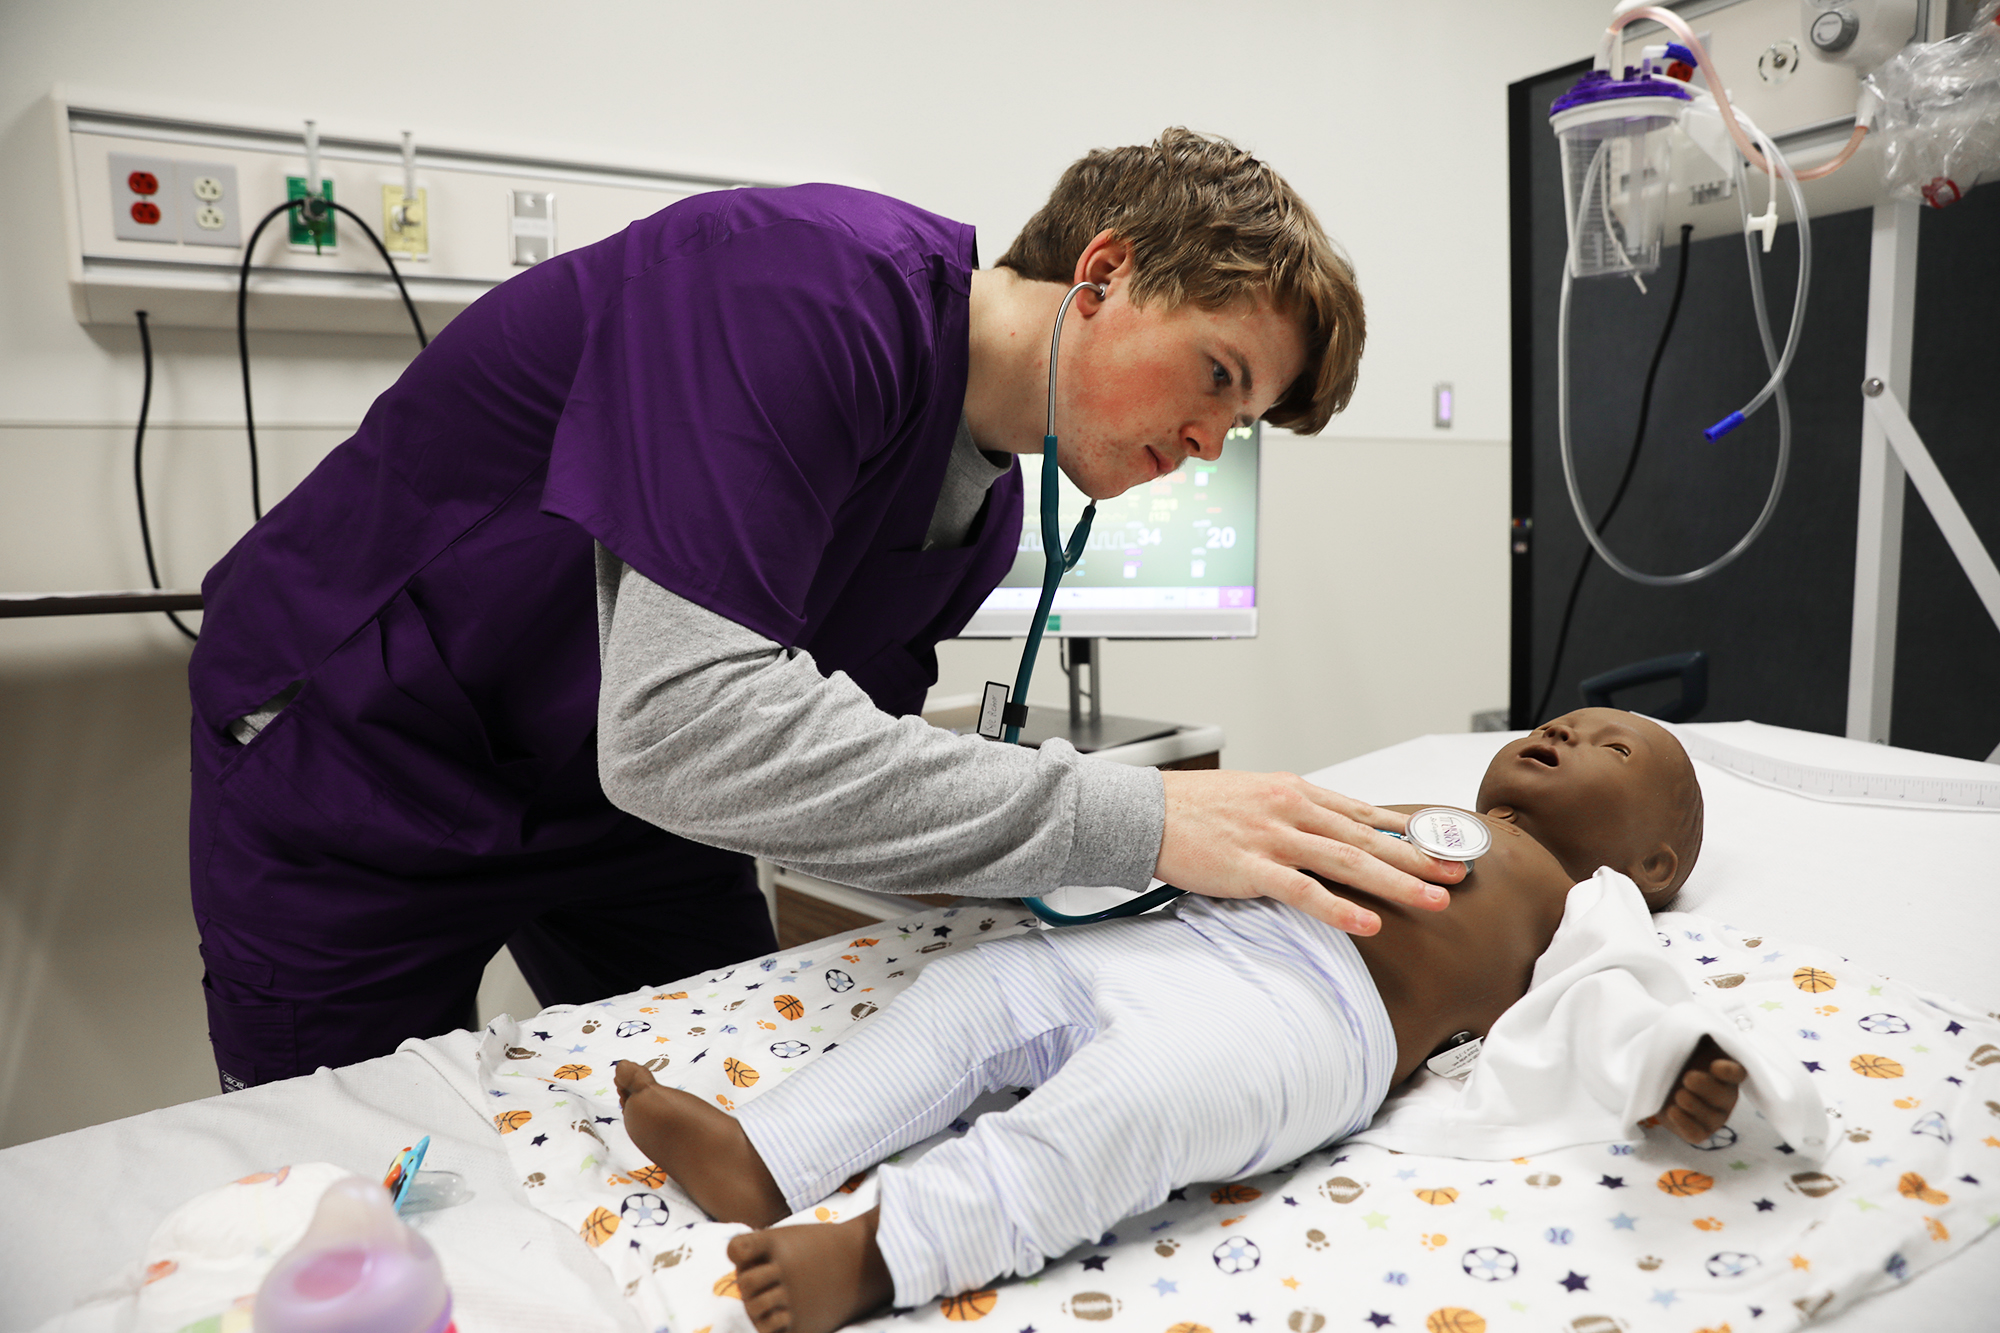 A student uses a stethoscope in a nursing lab to listen for to a simulation infant's heartbeat